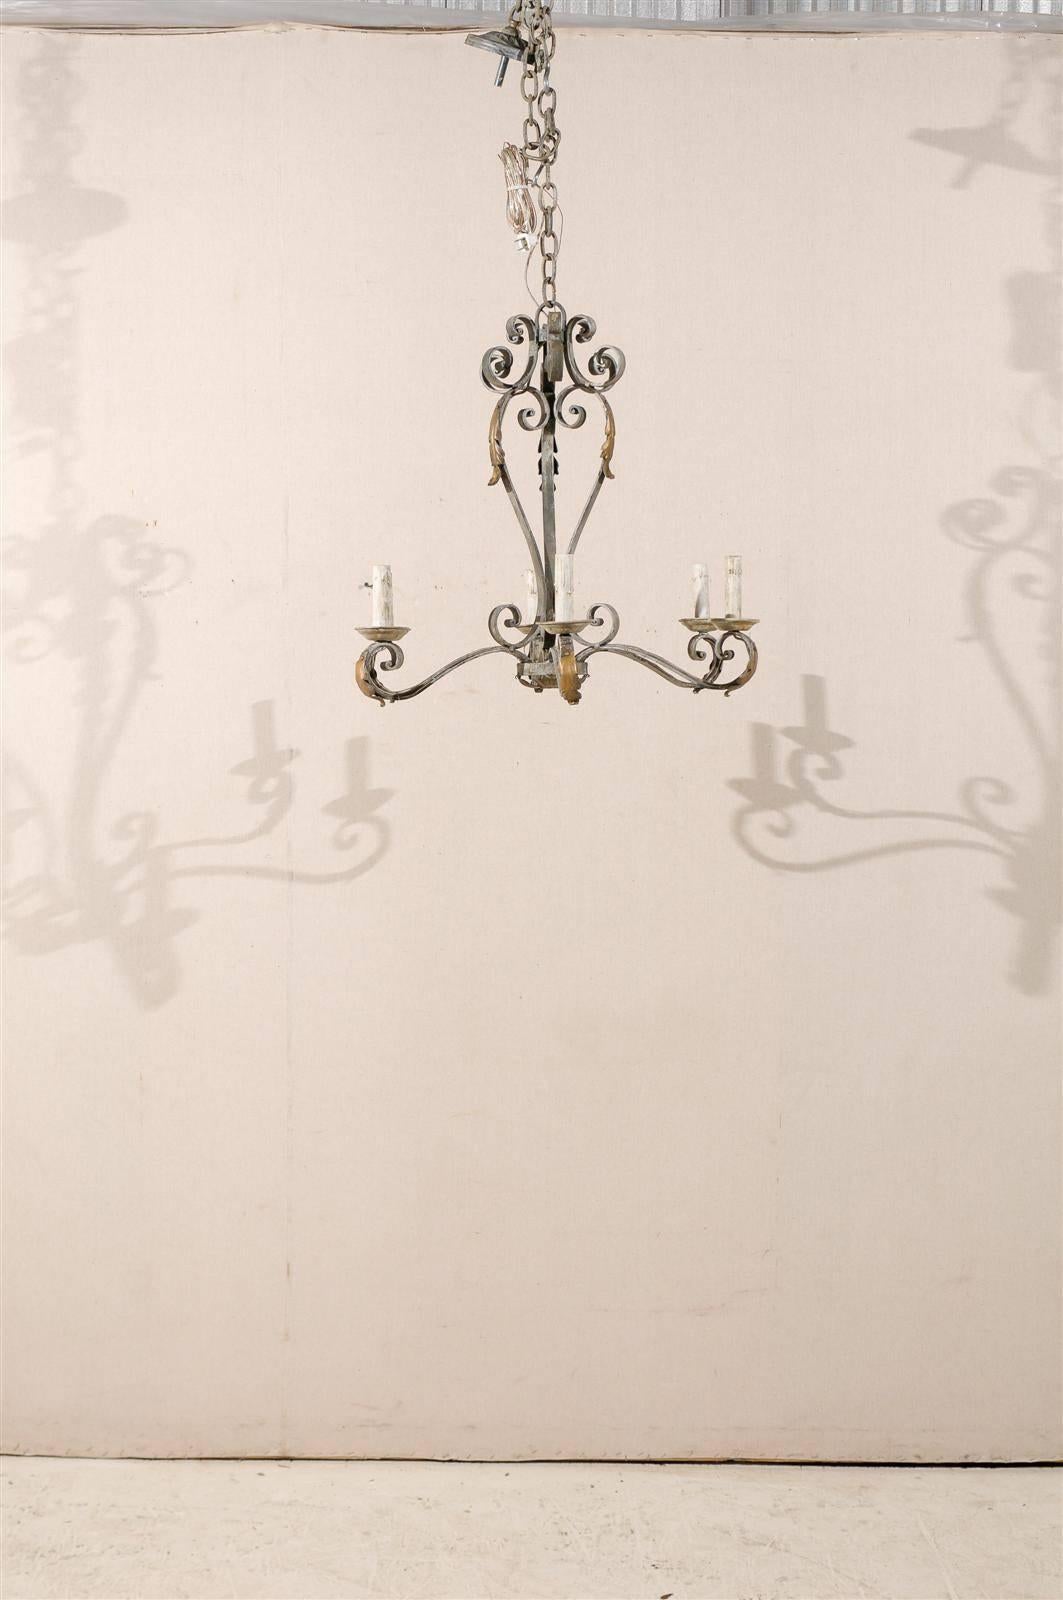 A French painted iron six-light chandelier with gilded acanthus leaves decor marking the end of the scrolled arms and wooden bobeches, from the Mid-20th century. The chandelier has been rewired for the US.